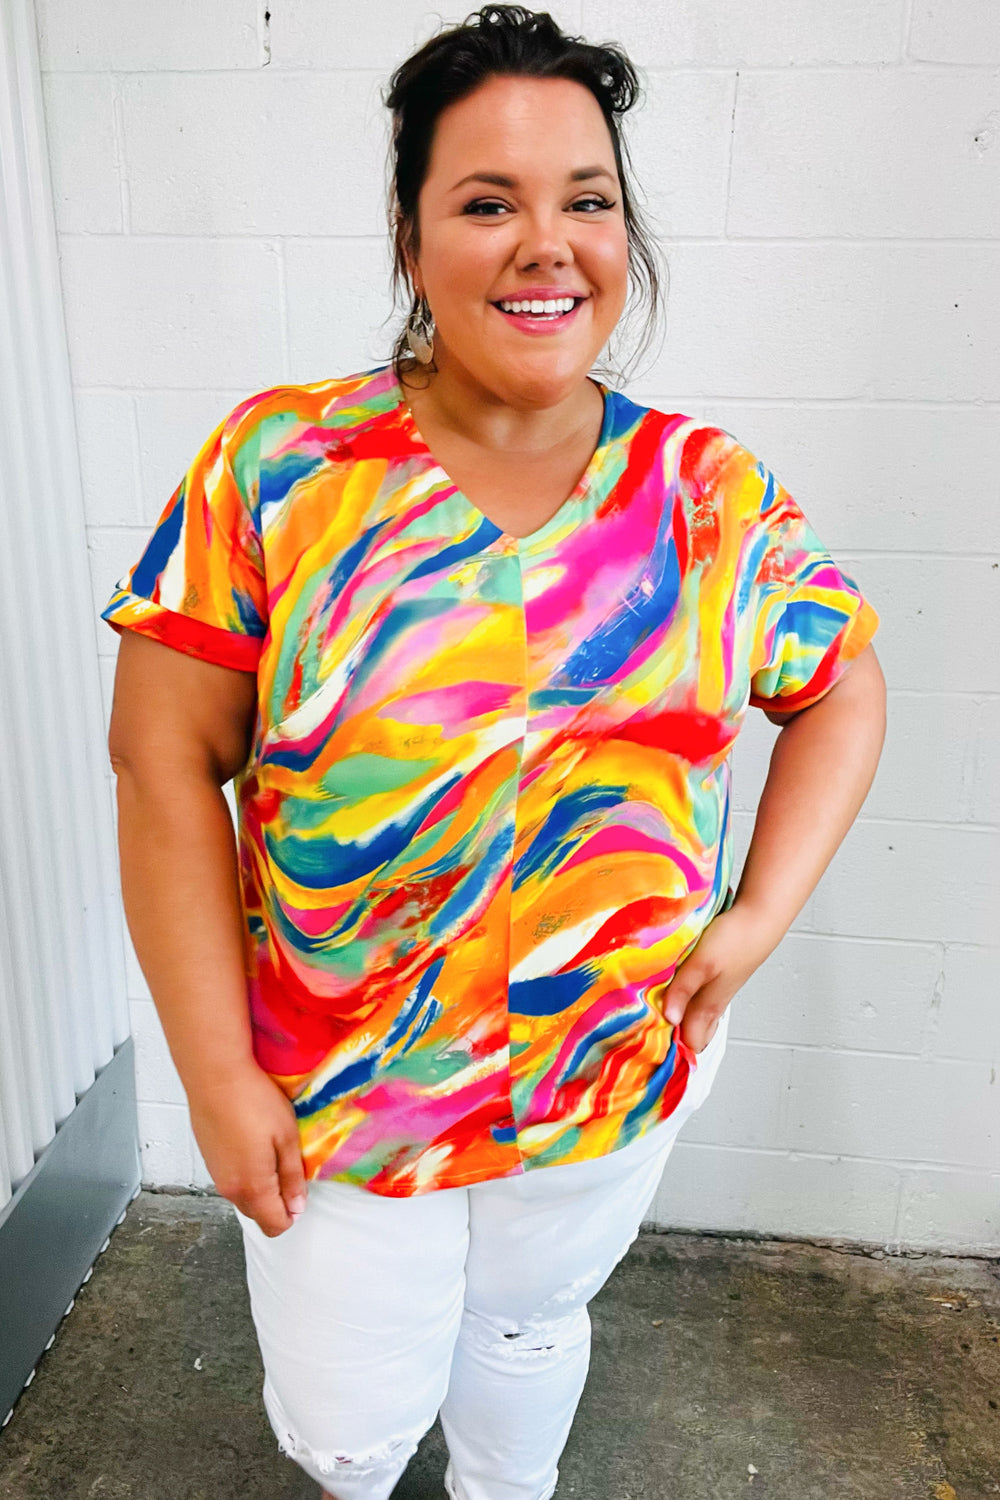 Watercolor Paint Strokes V Neck Top